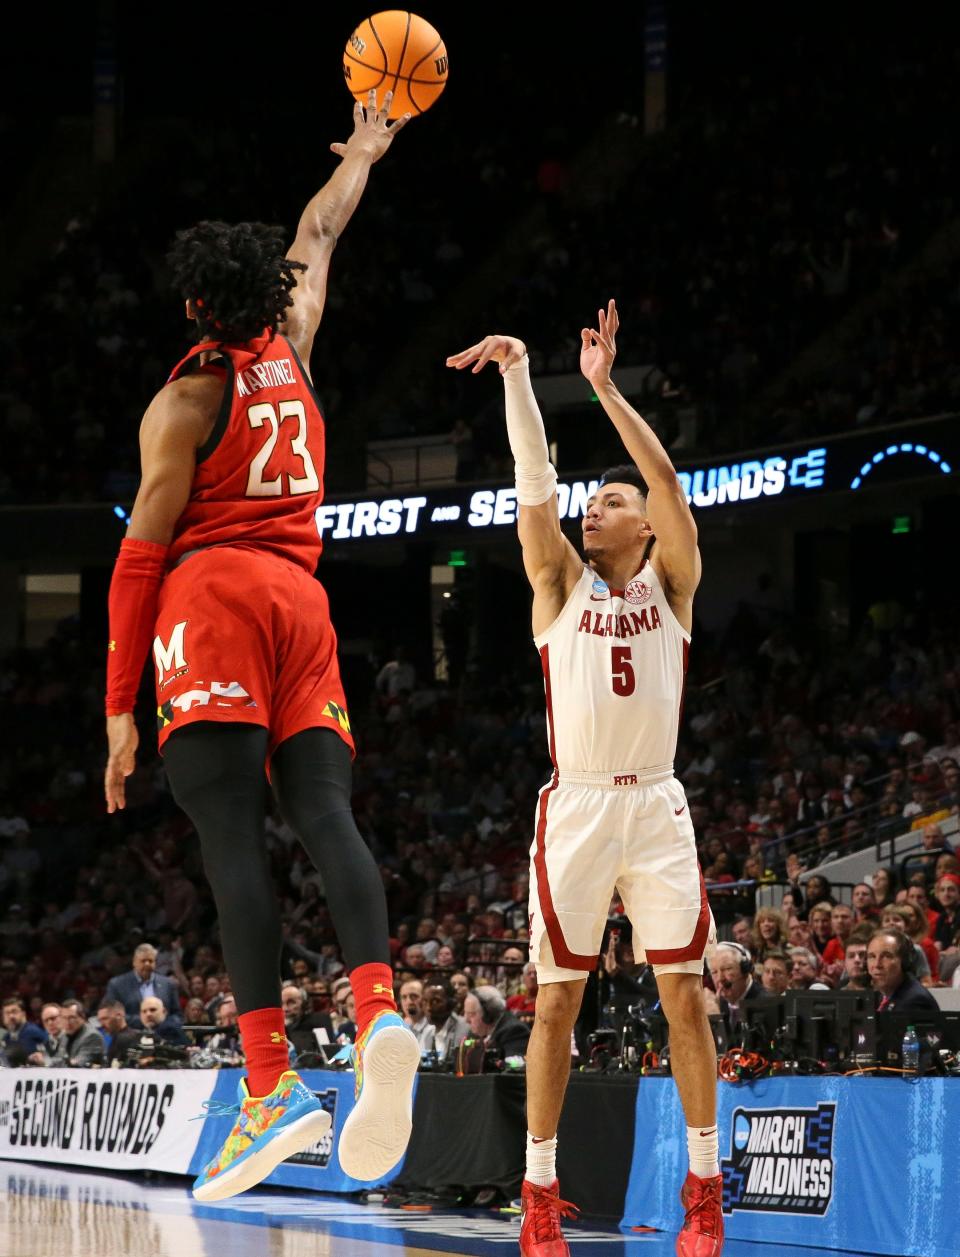 Mar 18, 2023; Birmingham, AL, USA; Alabama guard Jahvon Quinerly (5) shoots a three over Maryland guard Ian Martinez (23) at Legacy Arena during the second round of the NCAA Tournament. Alabama advanced to the Sweet Sixteen with a 73-51 win over Maryland. Mandatory Credit: Gary Cosby Jr.-Tuscaloosa News